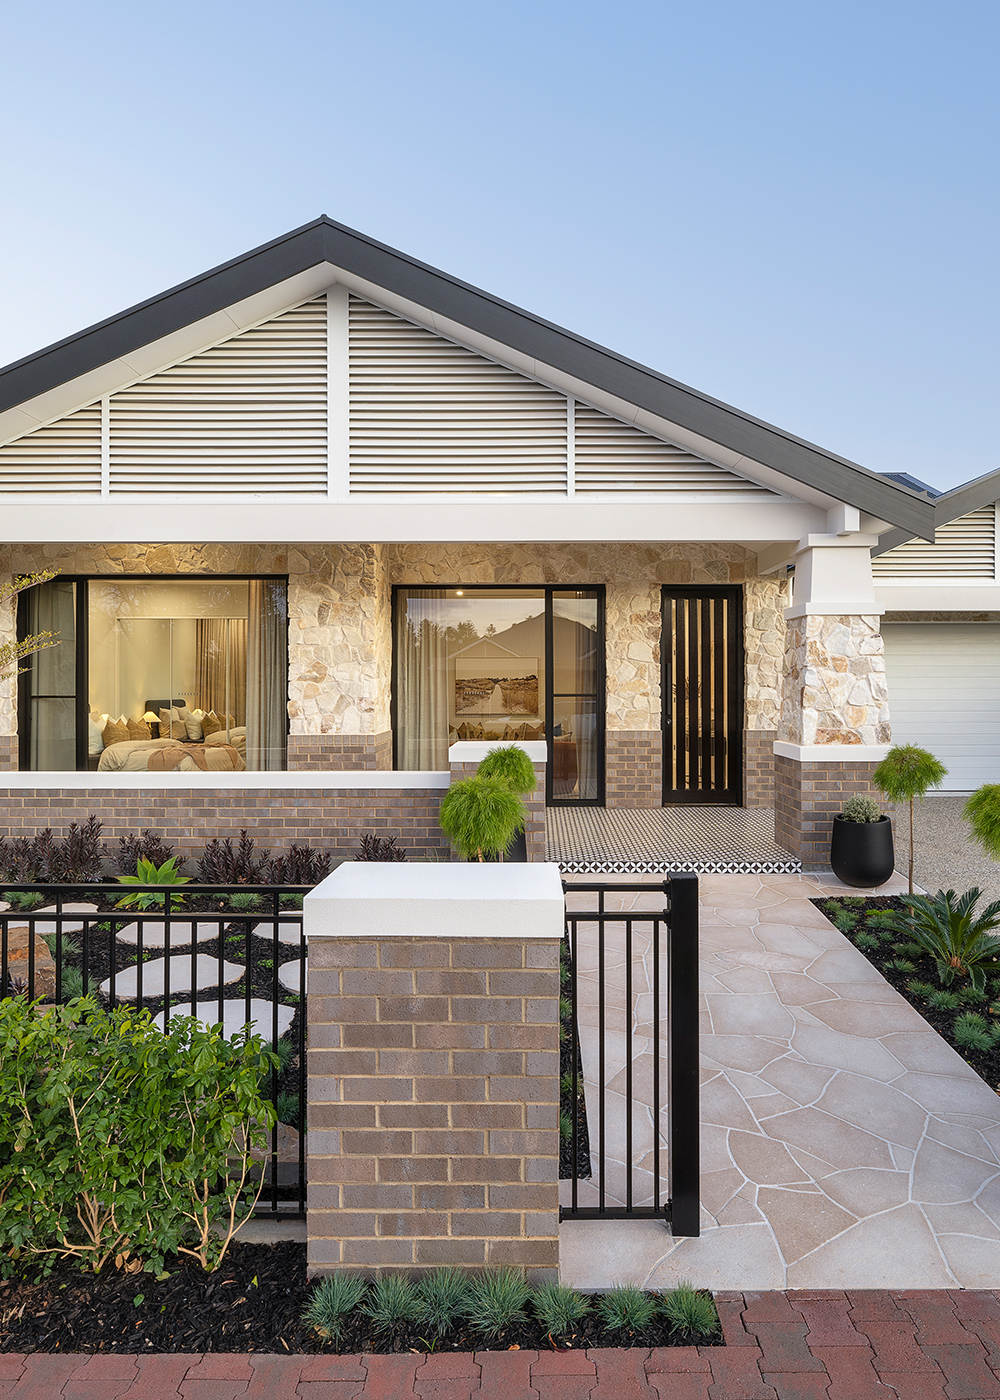 Bungalow style modern home, single story with brick and stone facade on a clear day.